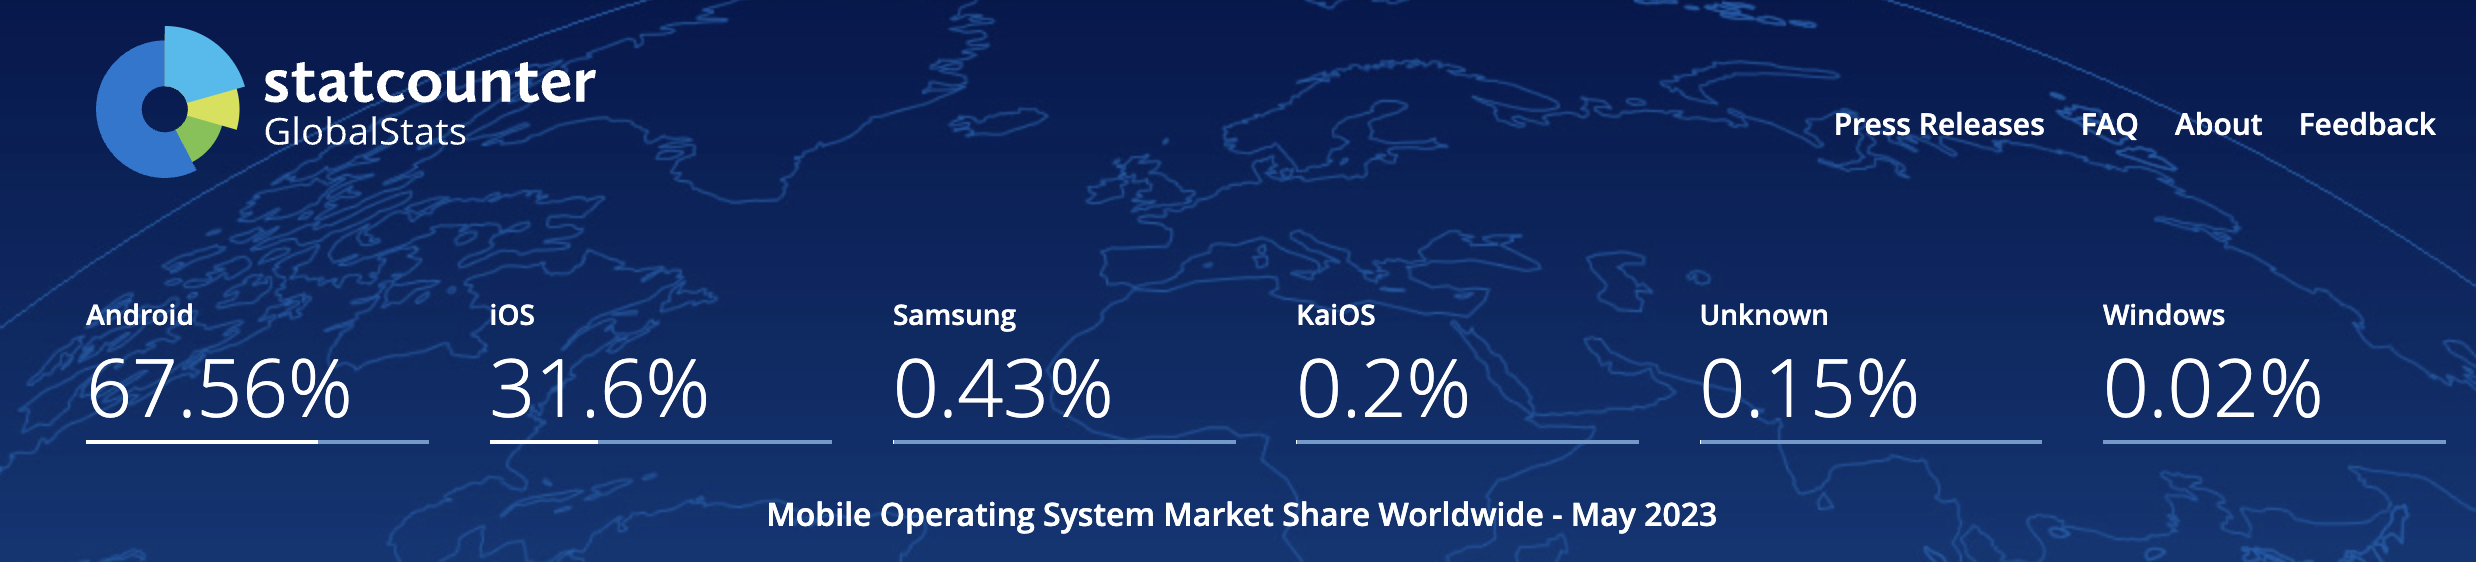 Chrome debug Android - Android OS Market Share